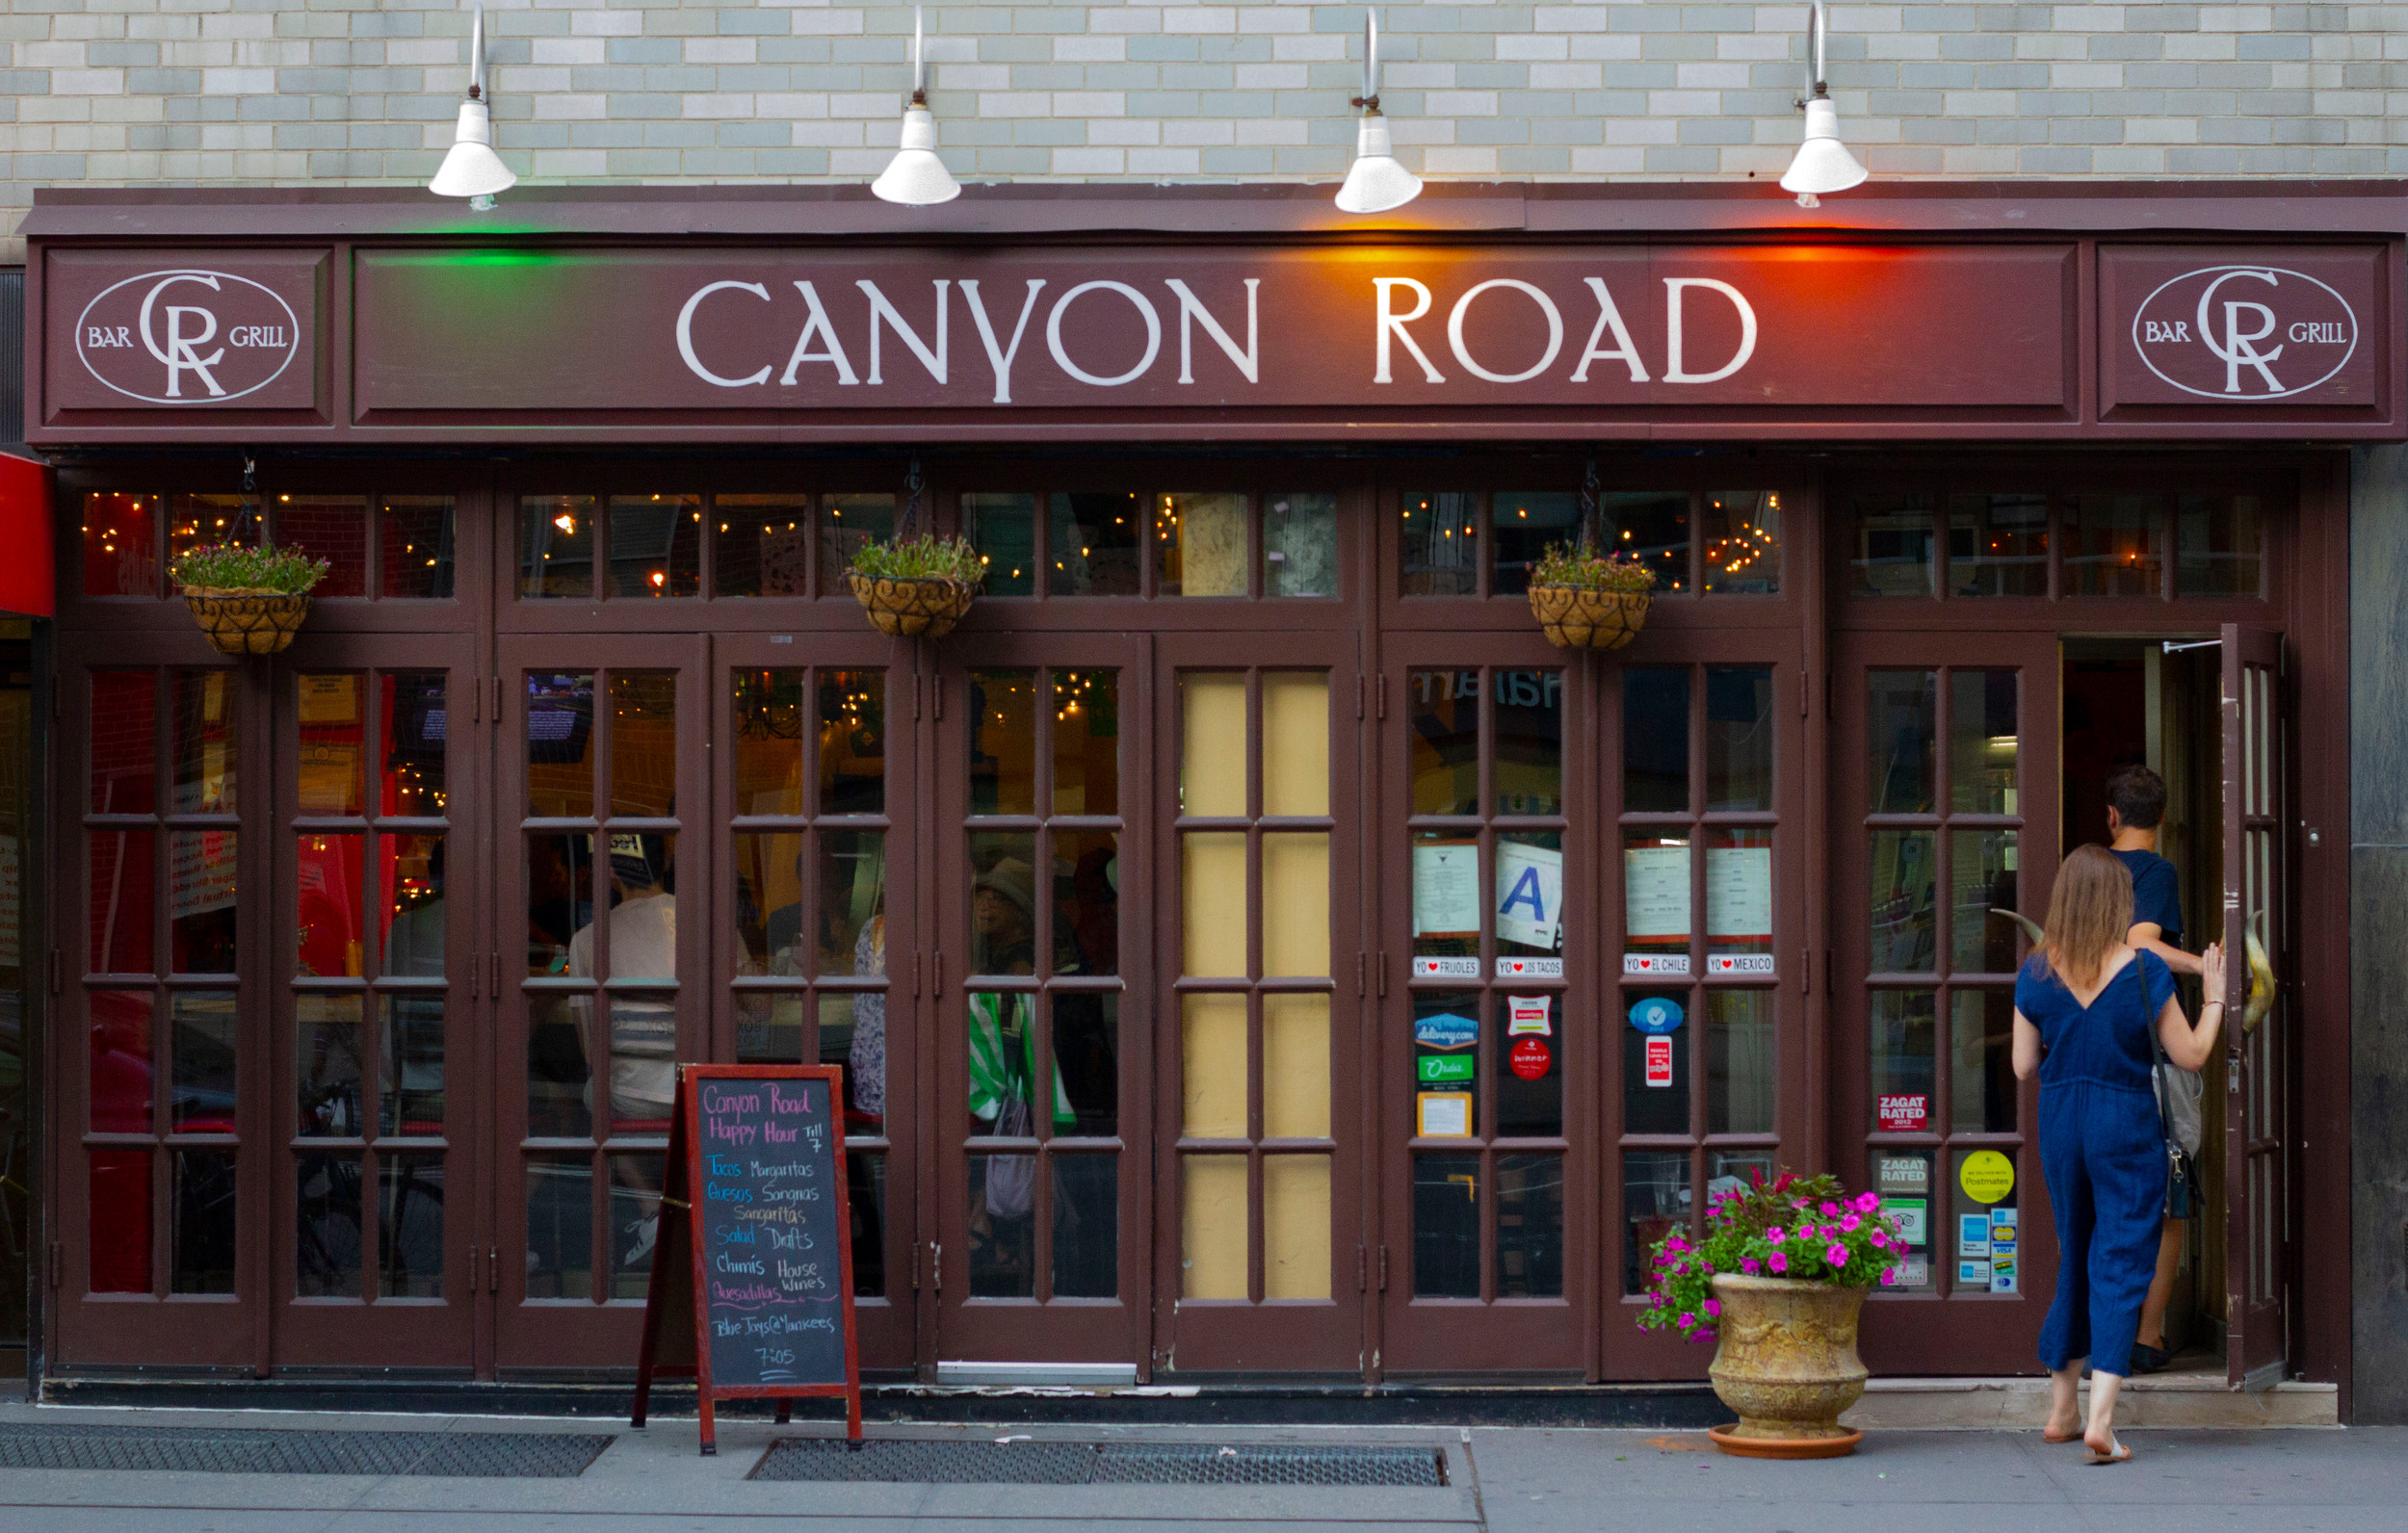 Canyon Road
Upper East Side happy hour